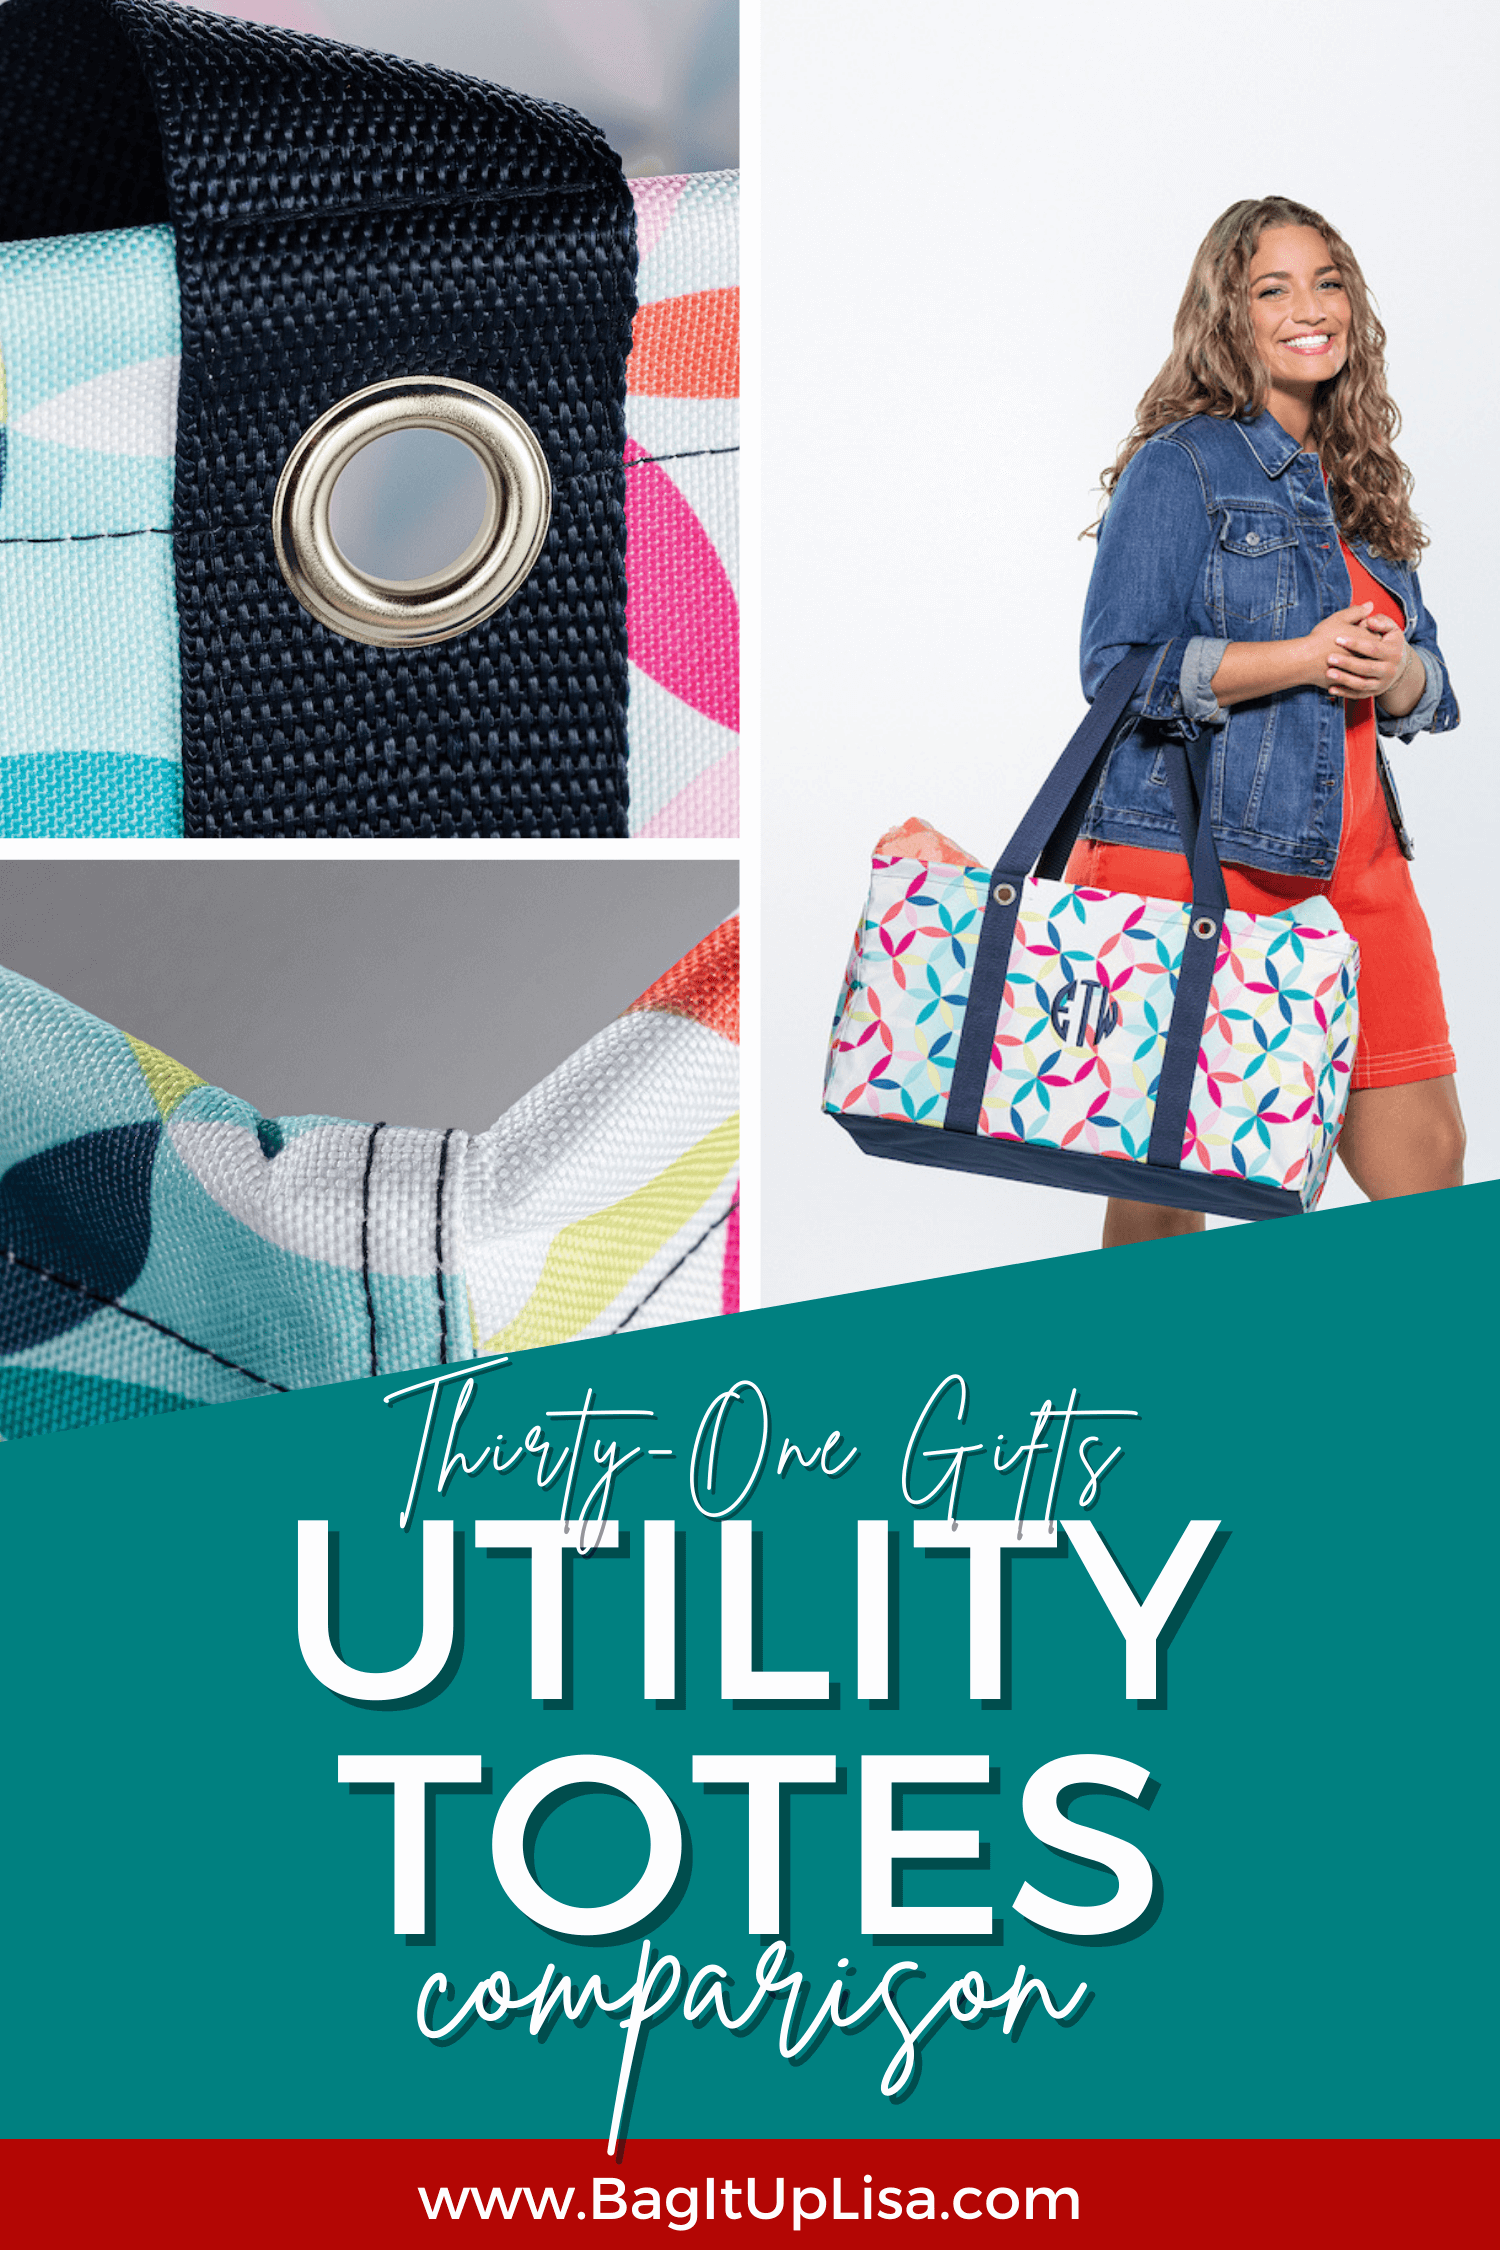 Deluxe Organizing Utility Tote (DOUT) 